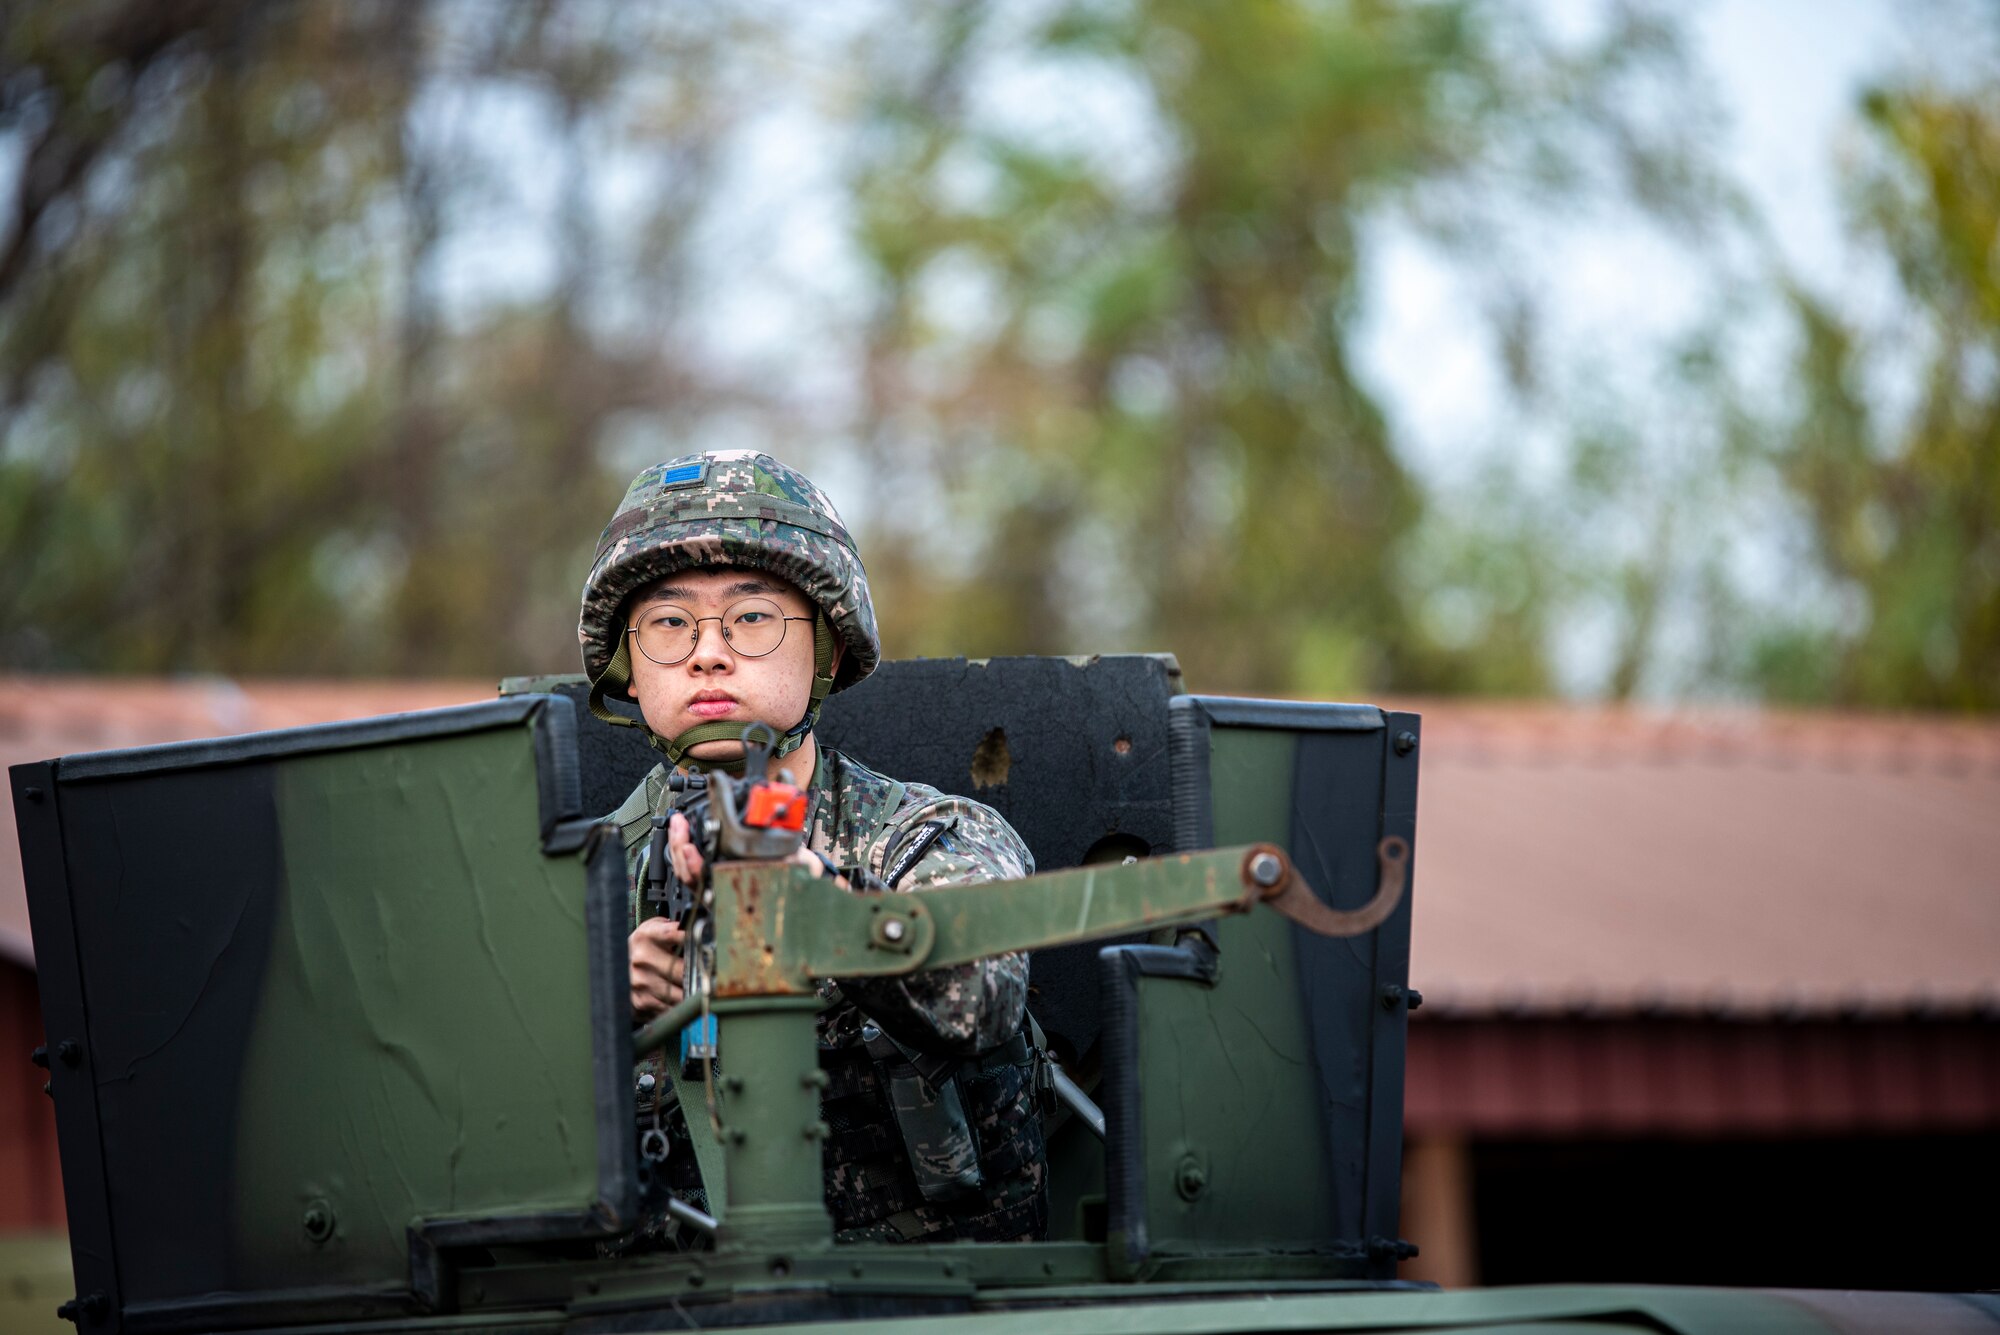 Republic of Korea Senior Airman Jungmin Lee, Military Policeman, watches for threats in the turret of a Humvee during a joint Combat Readiness Course (CRC) with 51st Security Forces Squadron Defenders at Osan Air Base, ROK, Nov. 3, 2022.